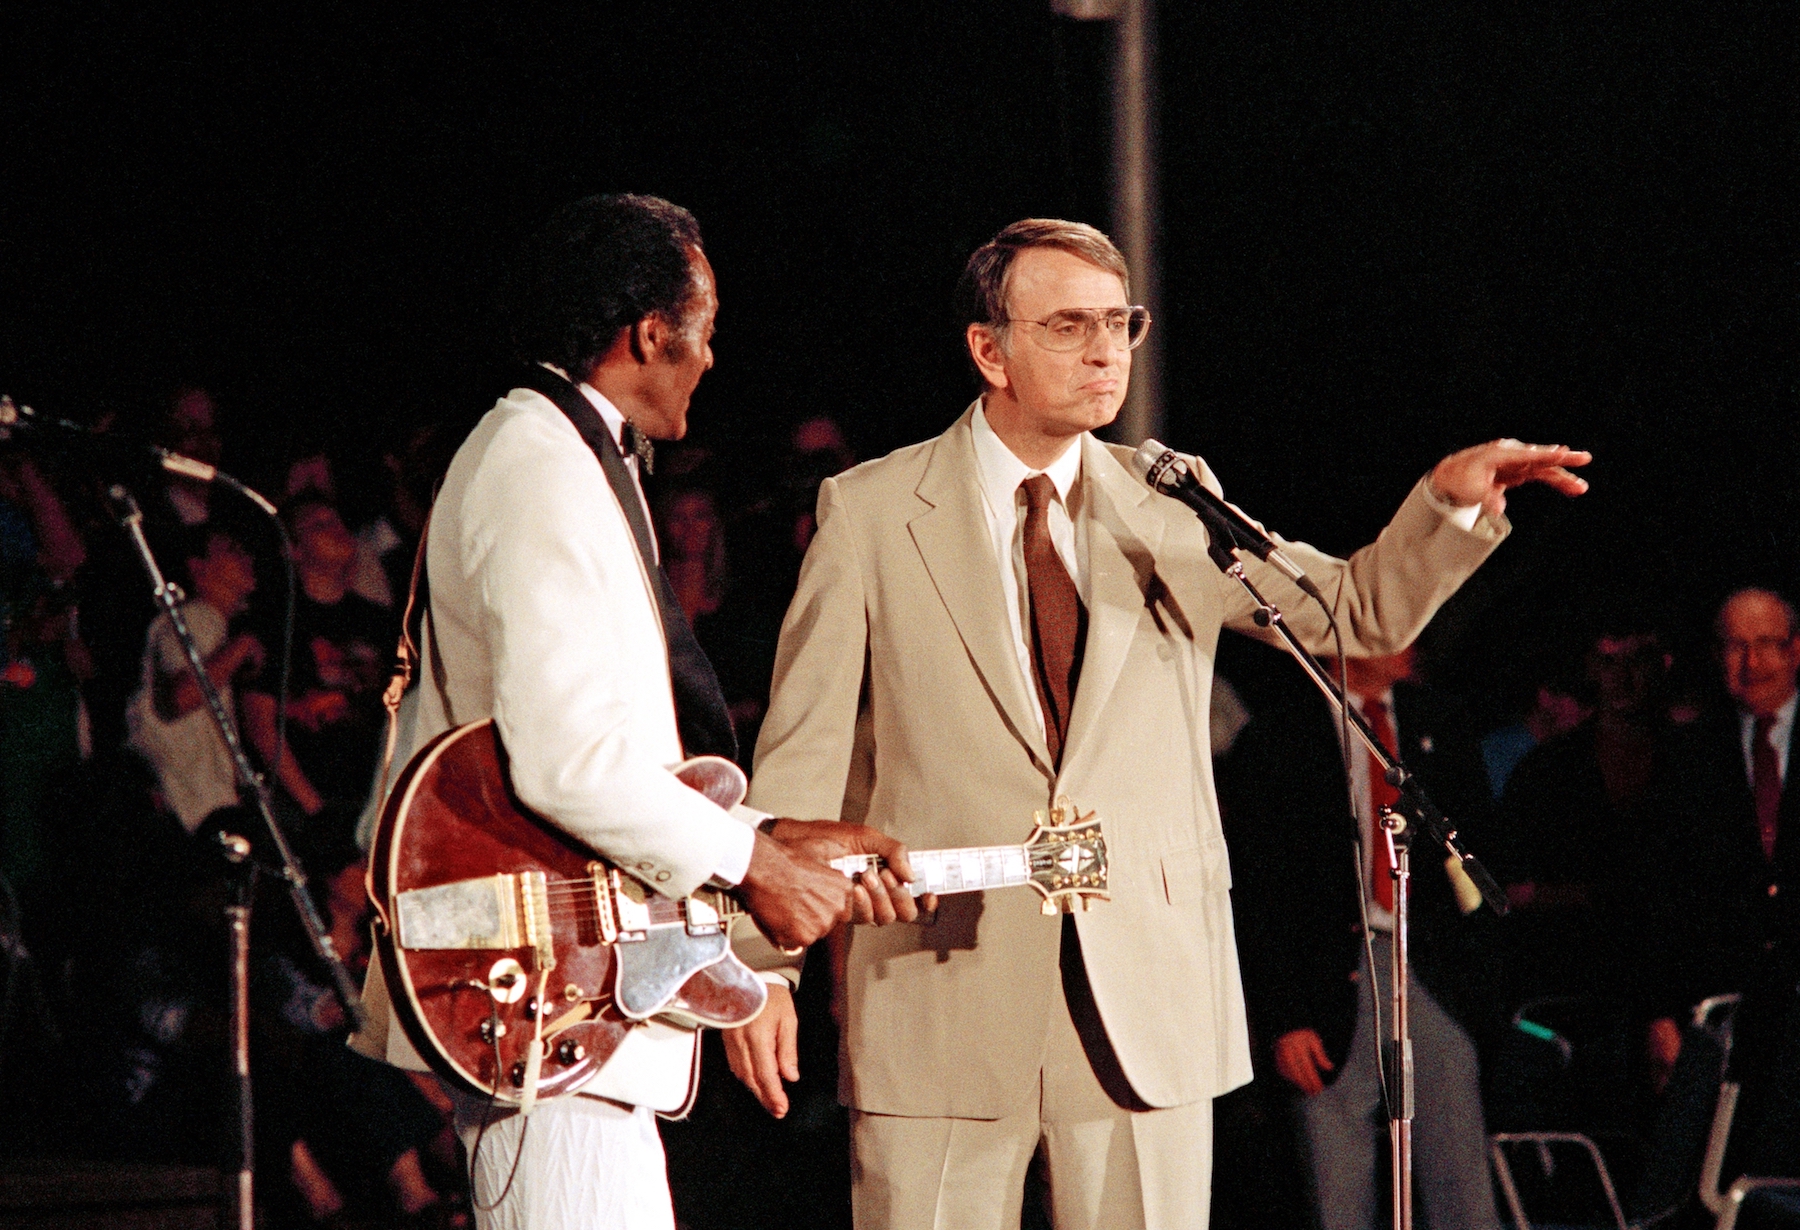 man holding guitar and another man gesturing standing at microphone